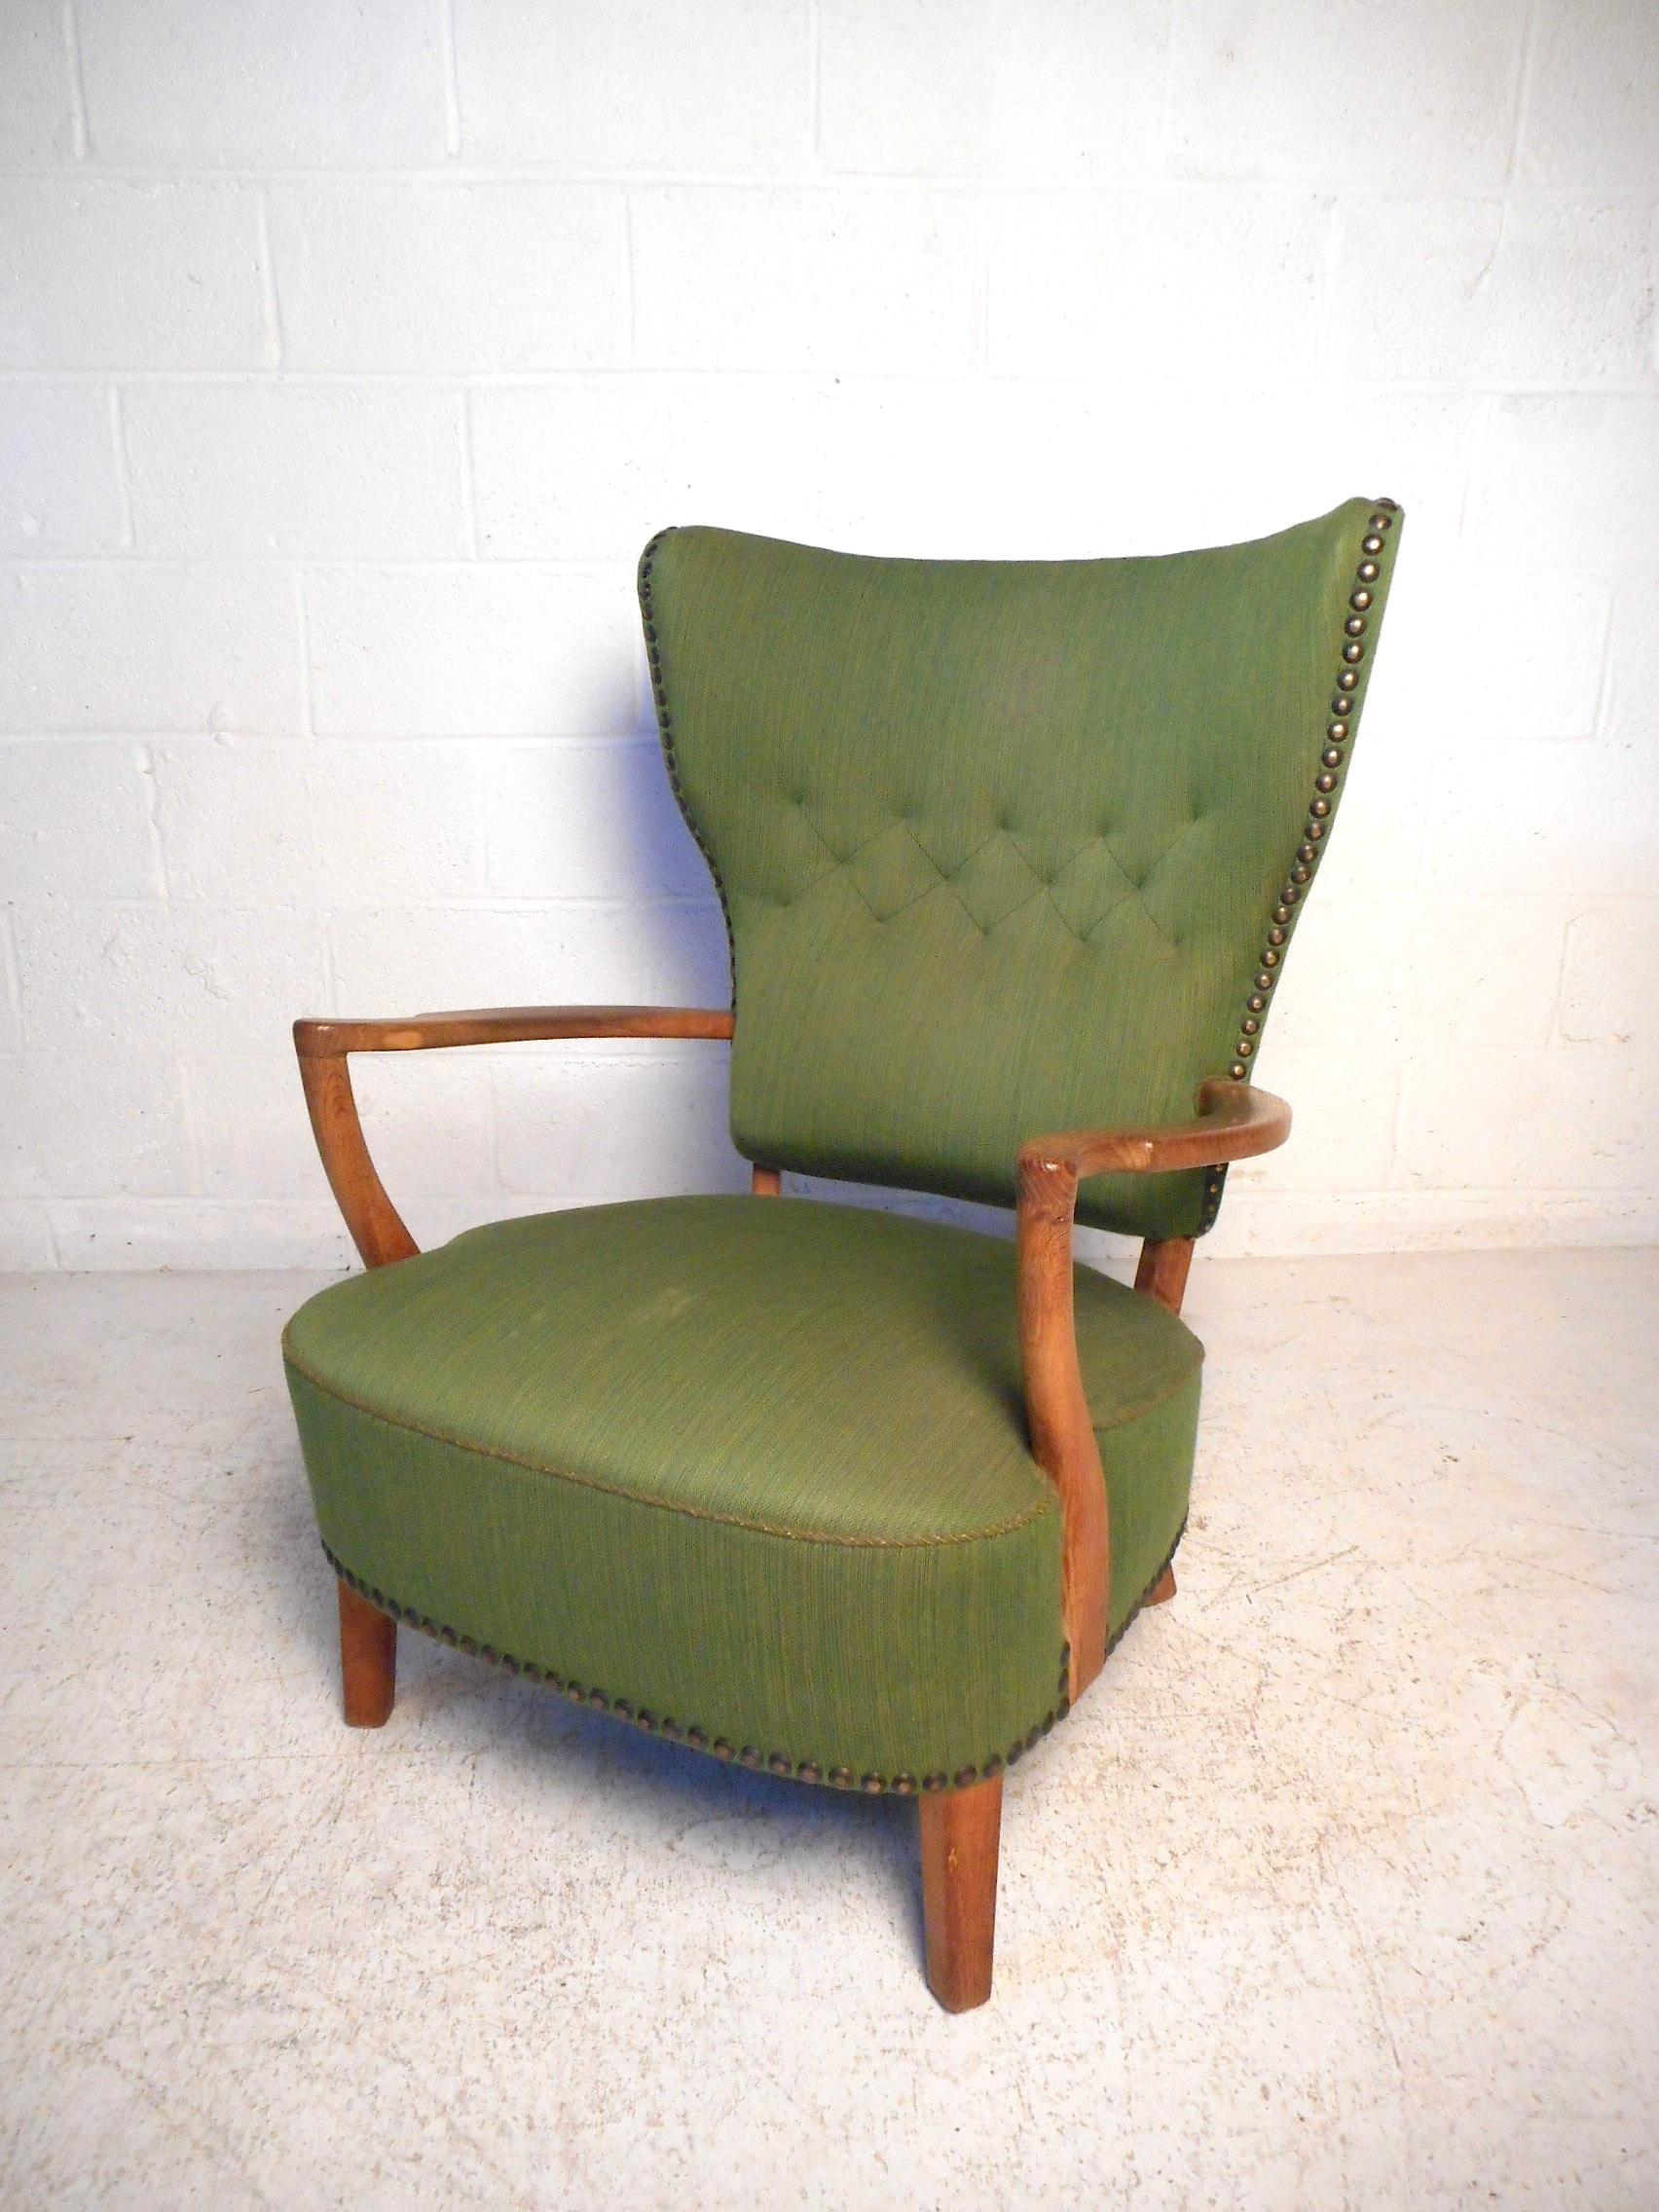 This impressive Danish modern chair features sculpted armrests, a tall winged back, and sturdy wooden legs. Covered with a vintage green upholstery, which has tufts on the backrest, and studs lining the contour of the chair. A great addition to any